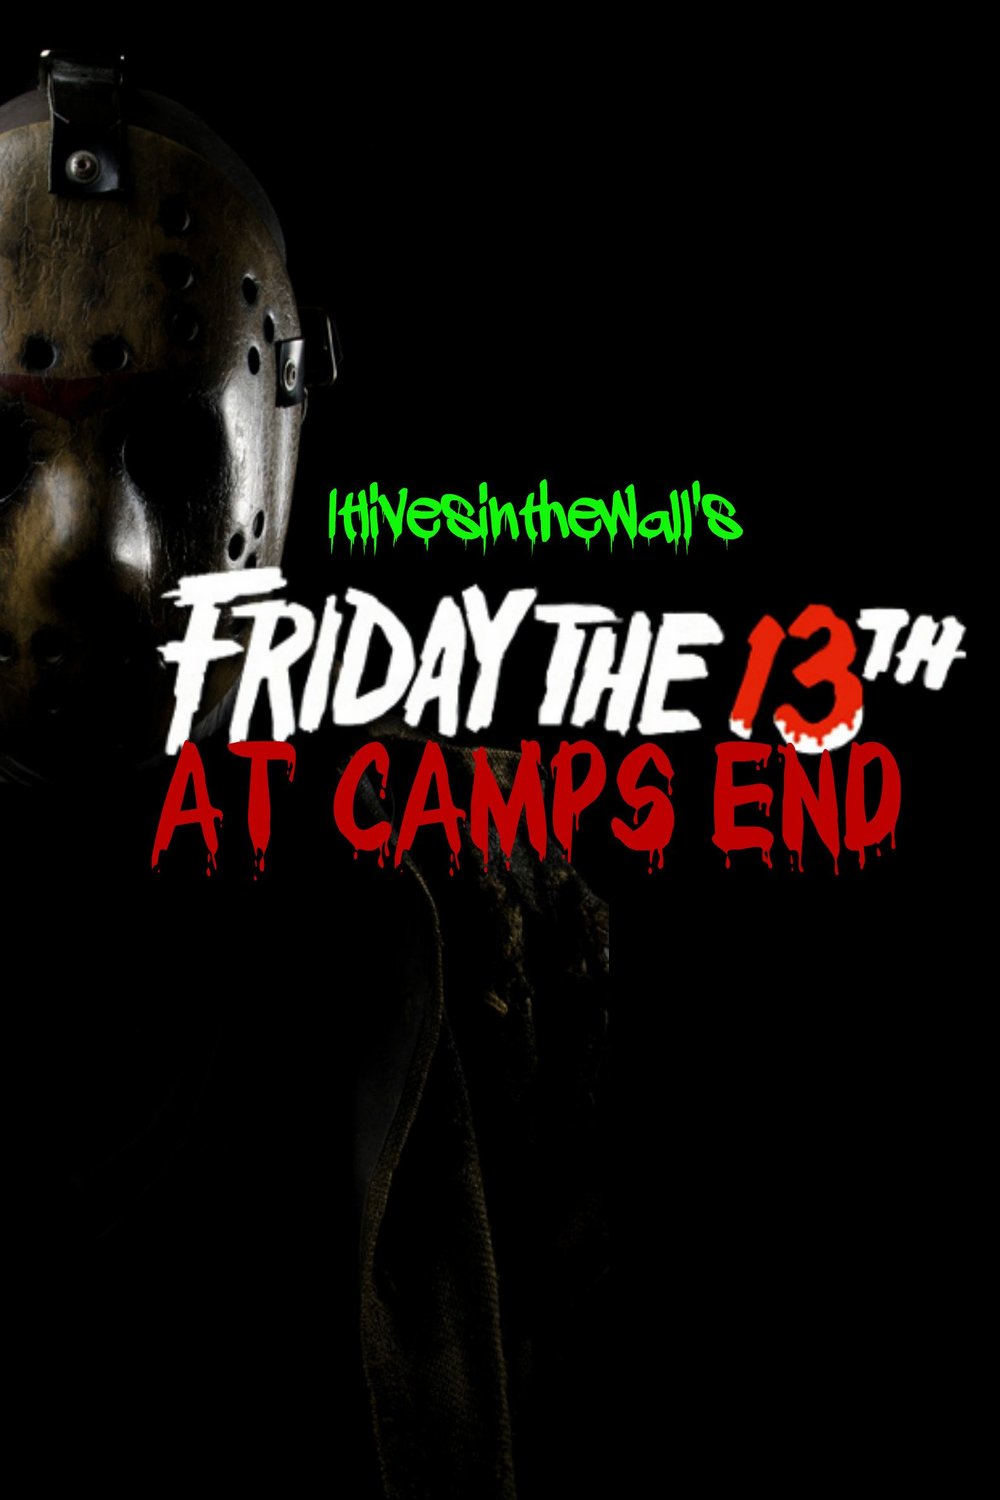 L'affiche du film Friday the 13TH: At Camp's End